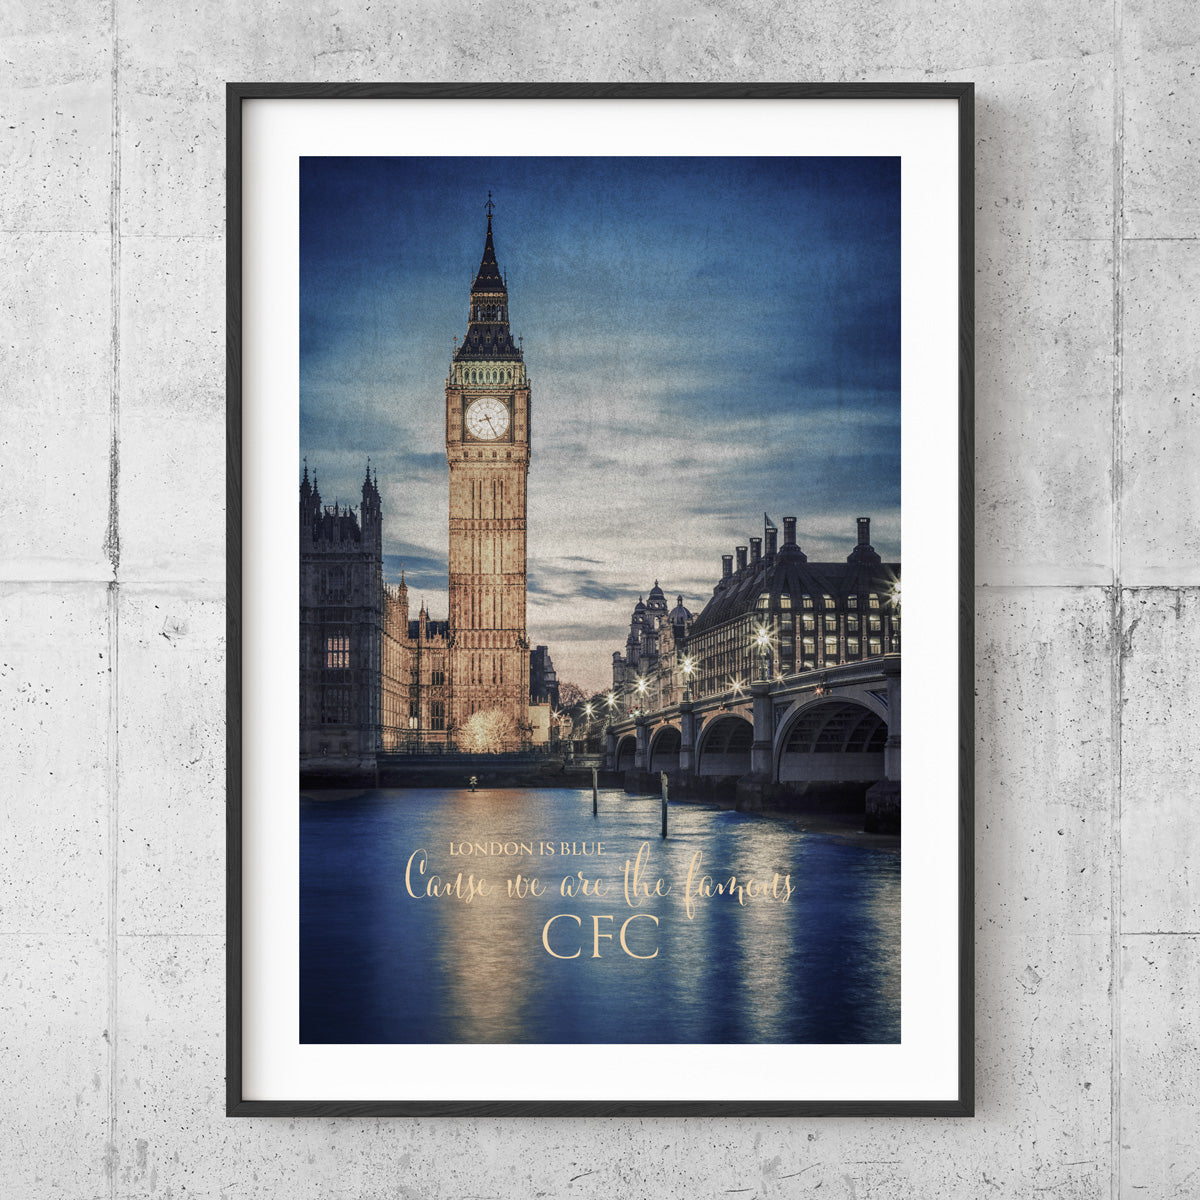 London is blue - Chelsea Poster